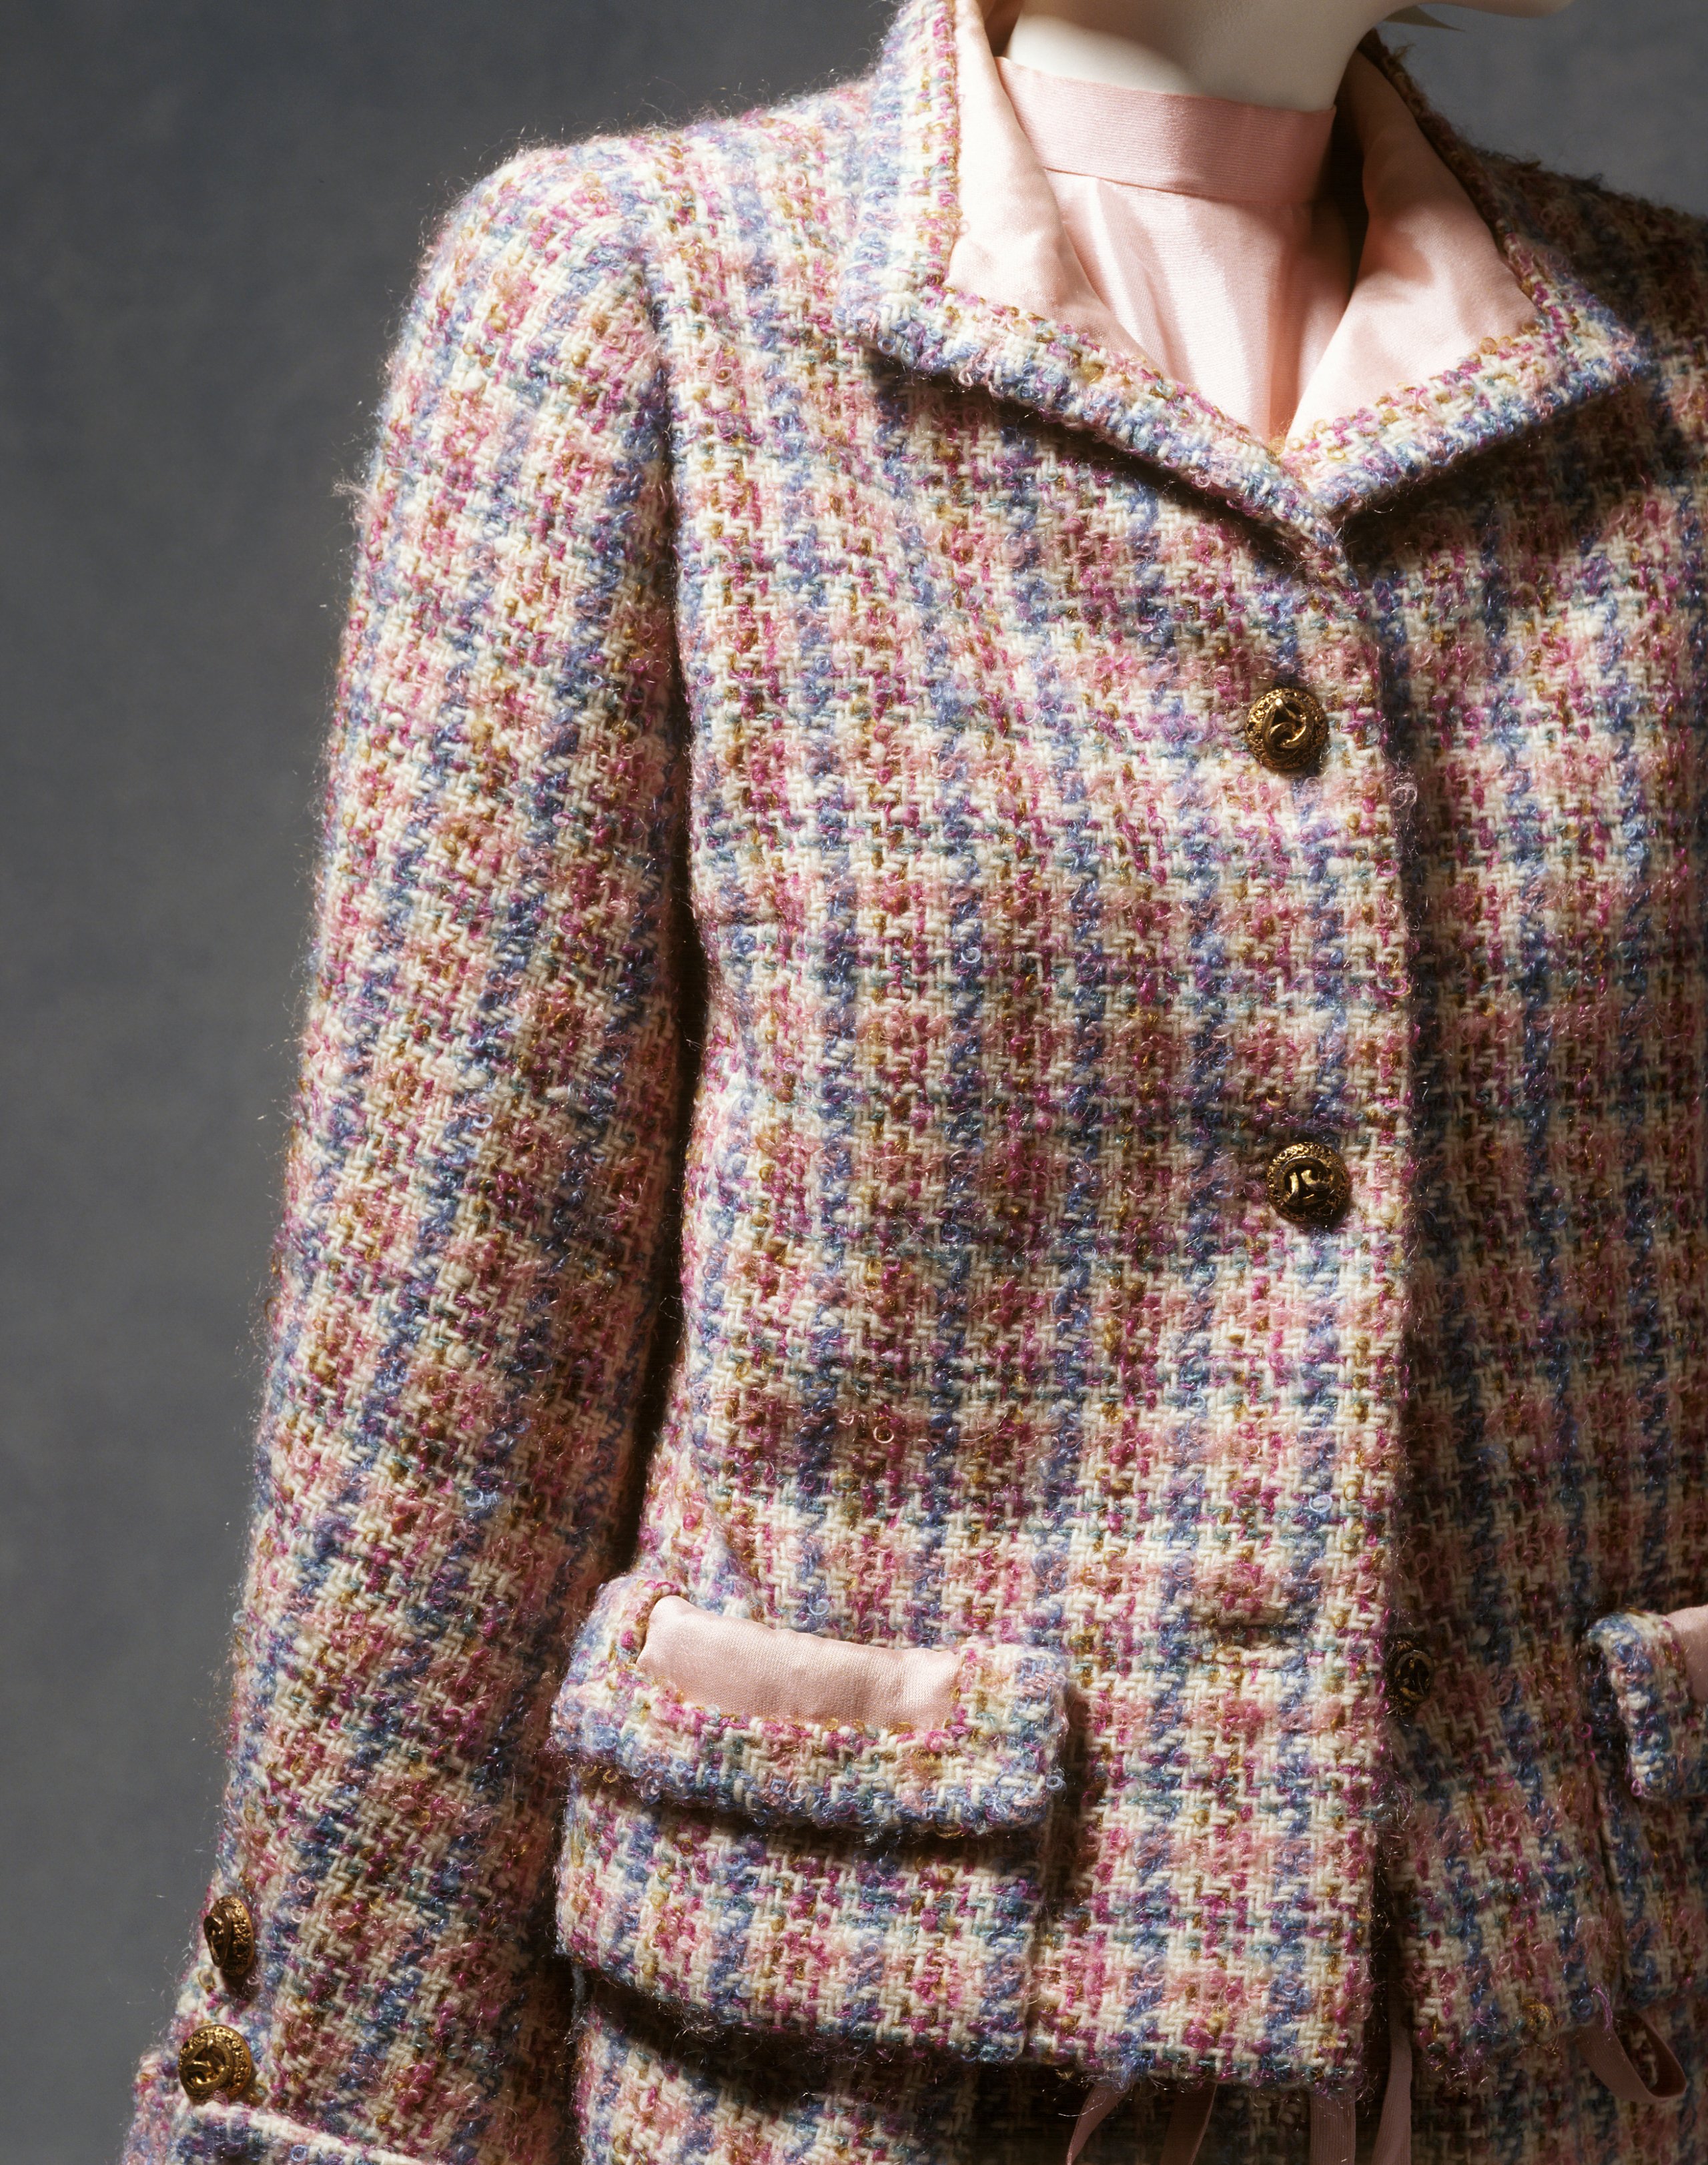 Why Chanel tweed jacket became the most iconic fashion item.